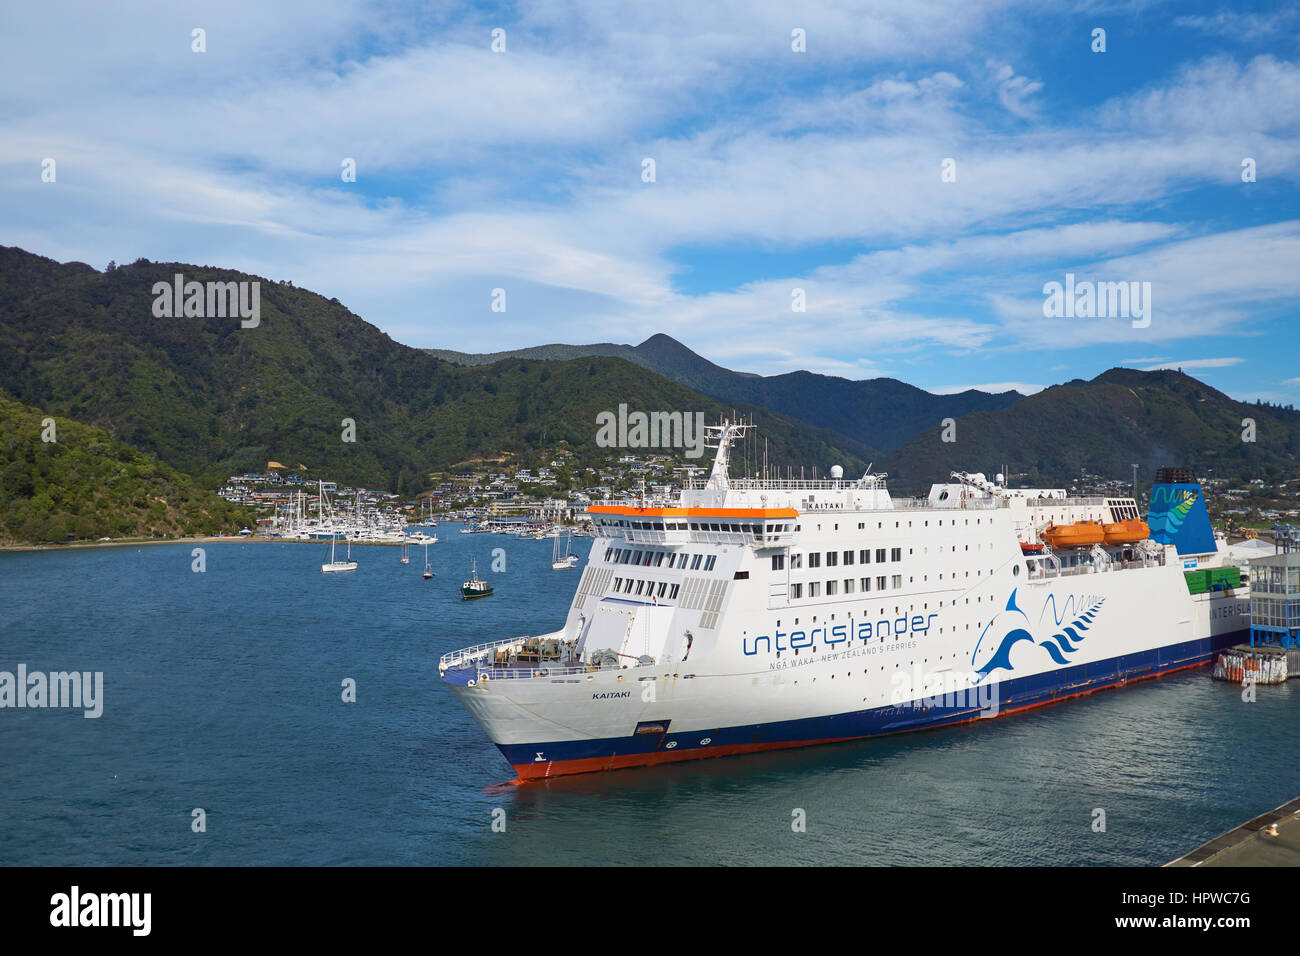 Interislander Cook Strait ferry between Wellington and Picton - docked in Picton in the beautiful Marlborough Sounds, New Zealand Stock Photo